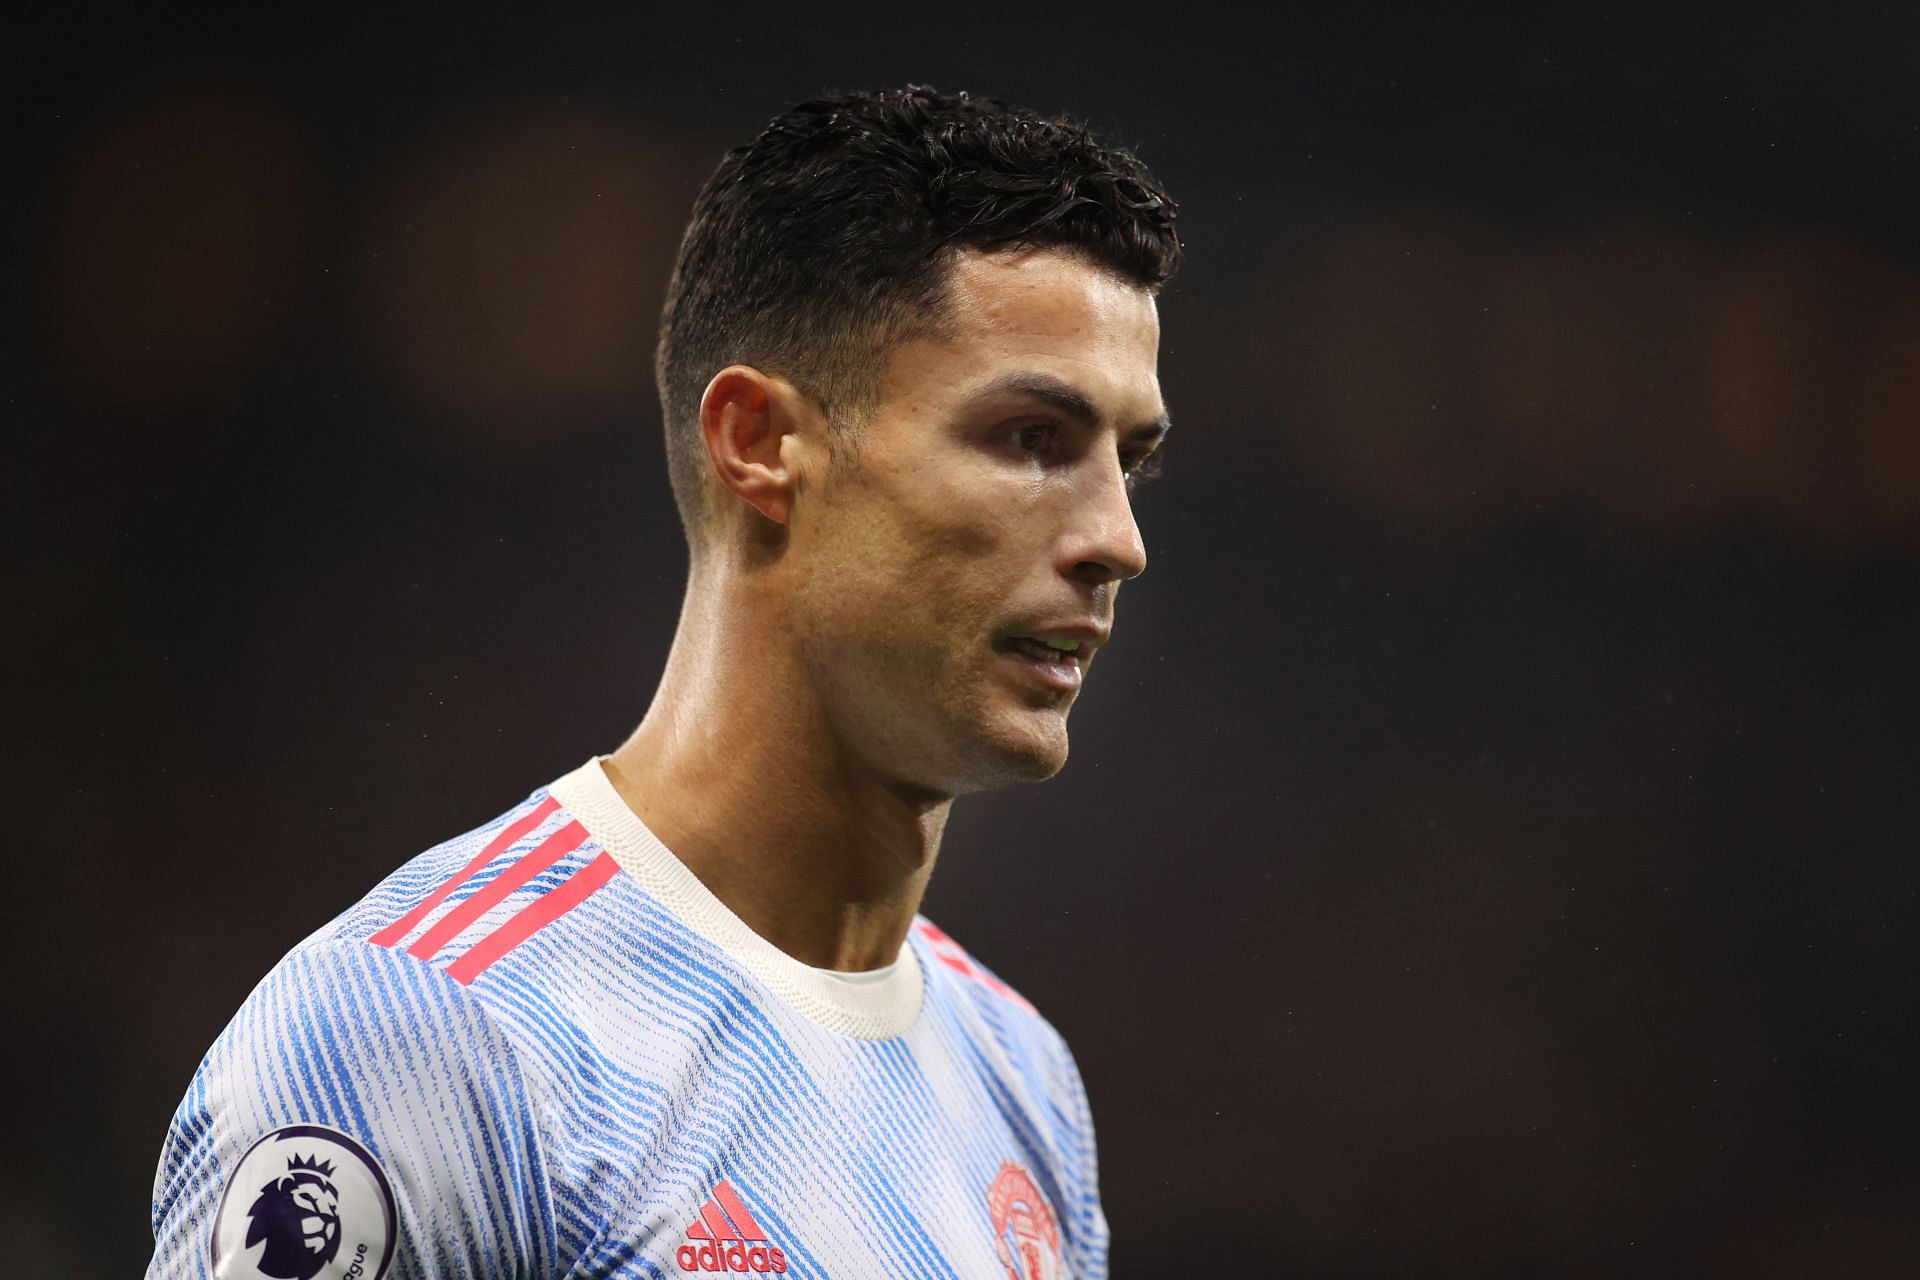 Paul Merson believes Cristiano Ronaldo&rsquo;s arrival jeopardised Ole Gunnar Solskjaer&rsquo;s plans this season.